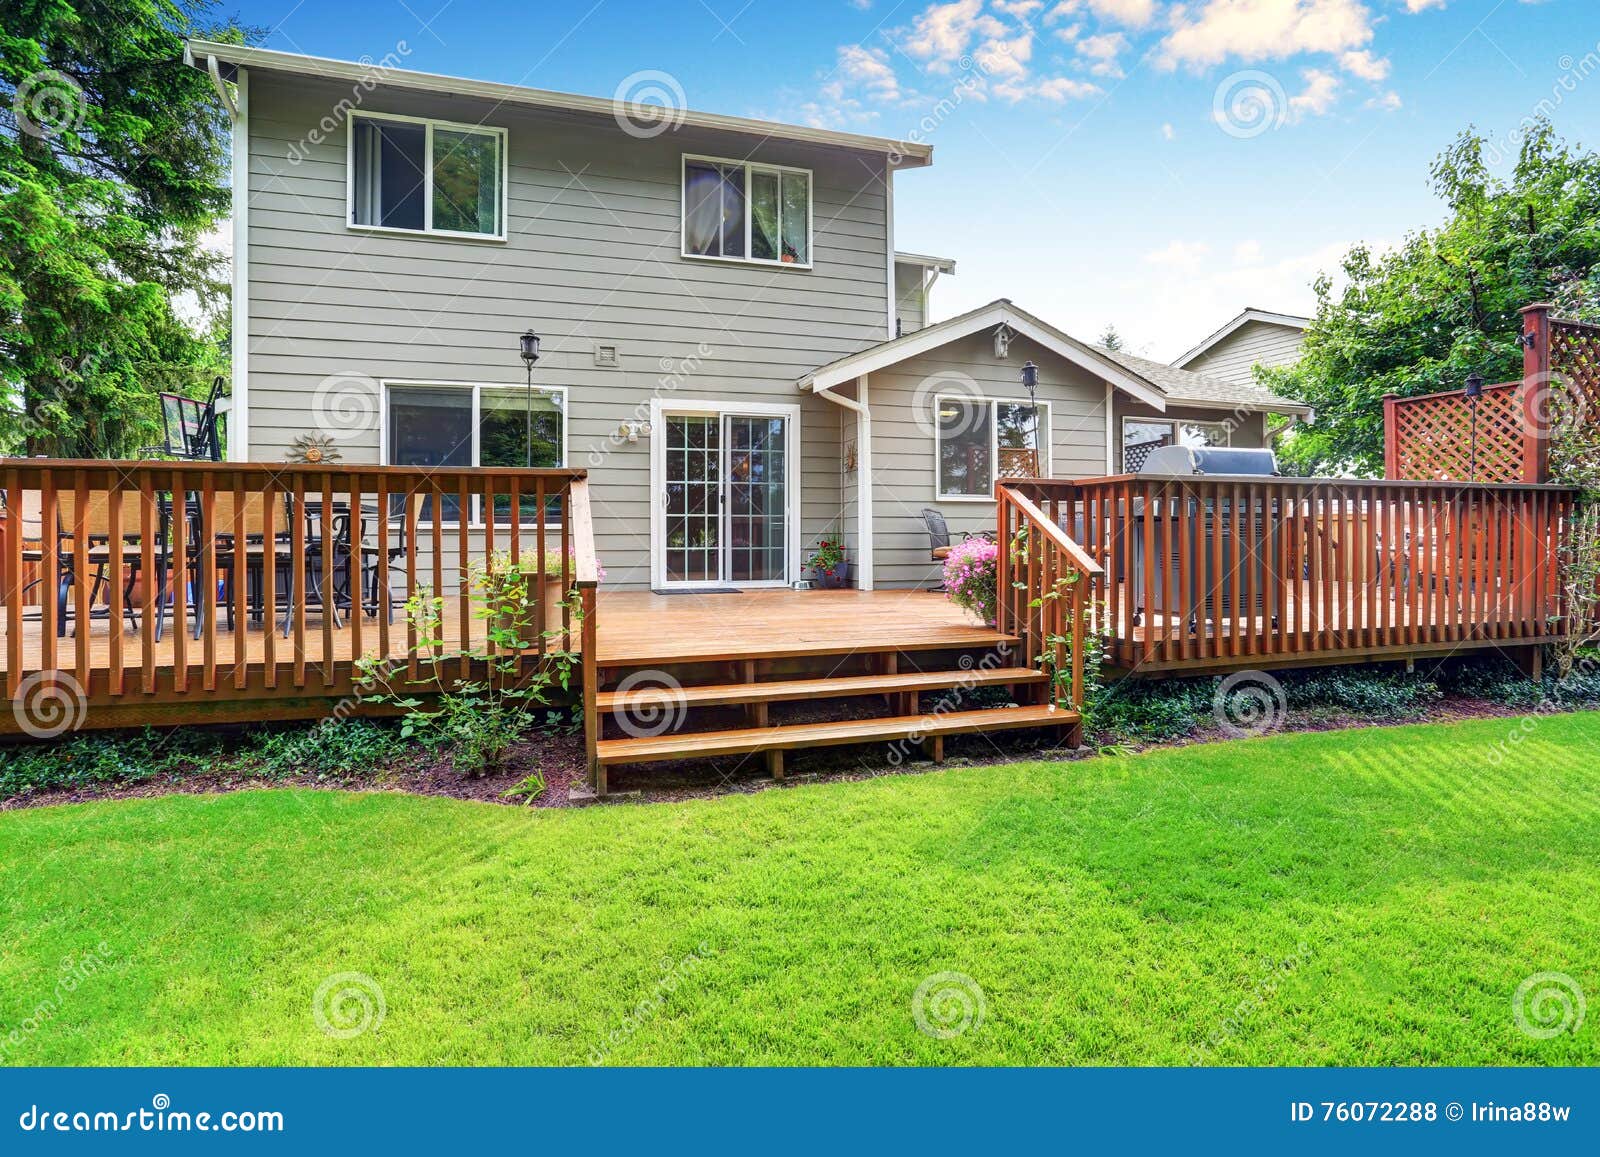 back yard house exterior with spacious wooden deck